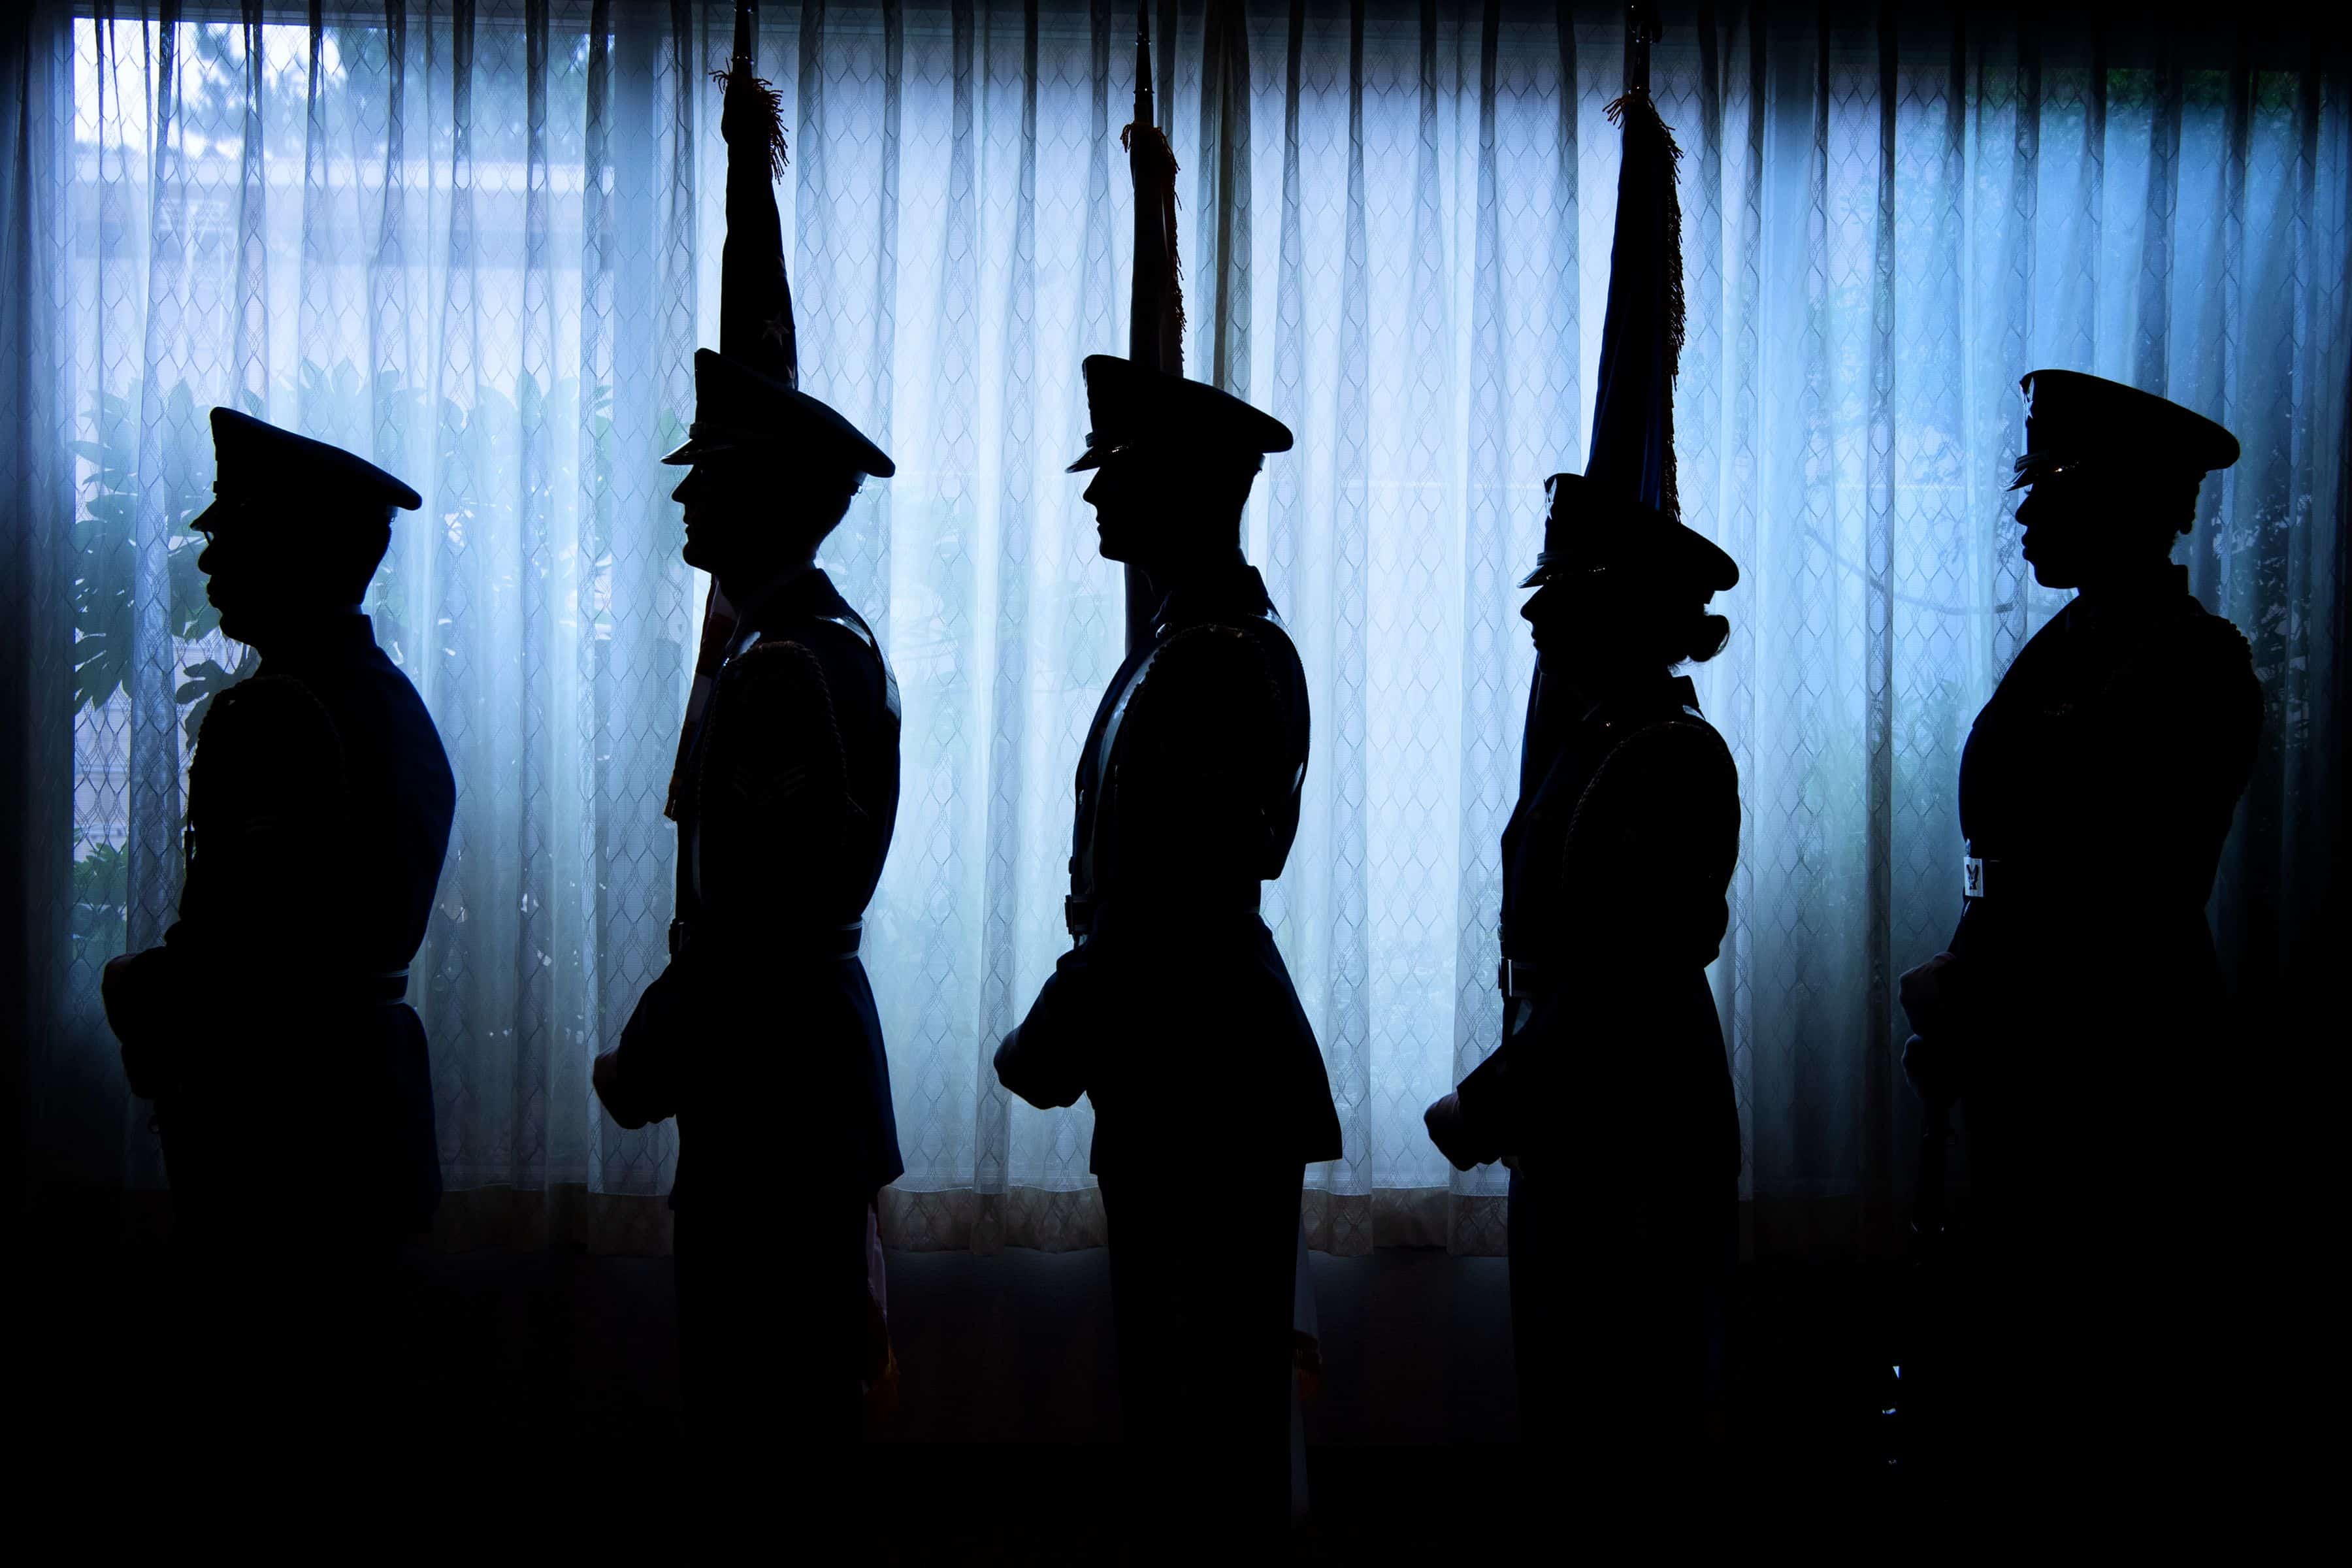 The Yokota Air Base Honor Guard stands by to present the colors during a promotion ceremony at Yokota Air Base, Japan, June 27, 2019. Their mission is to provide professional military honors for all official military and civil ceremonies as required by the wing, and higher headquarters. (U.S. Air Force photo by Yasuo Osakabe)